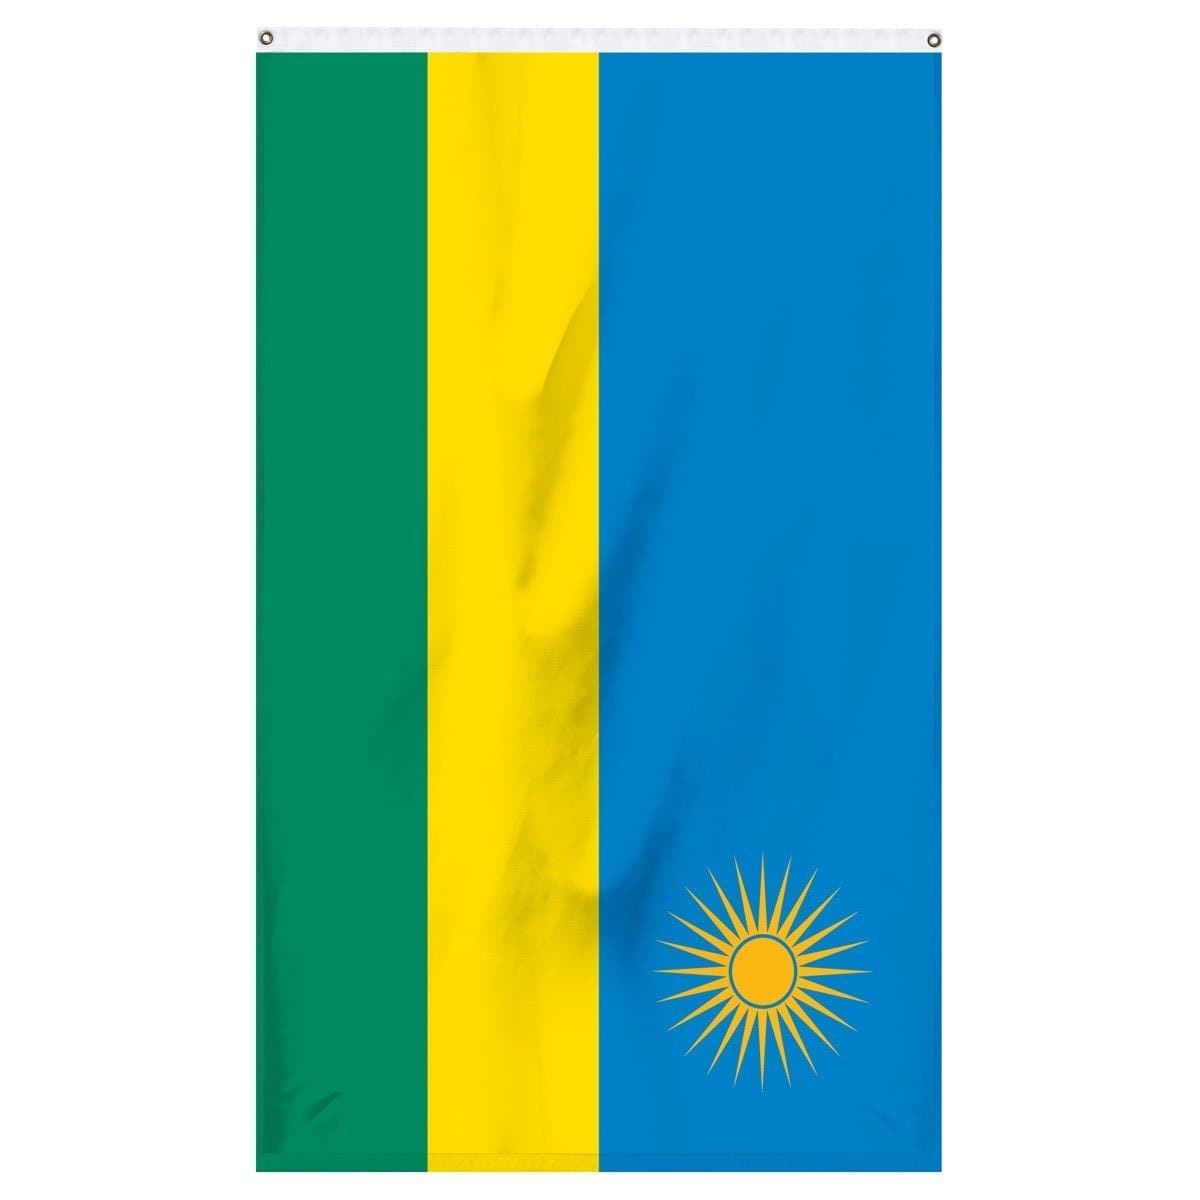 Rwanda national flag for sale to buy online now from an American company